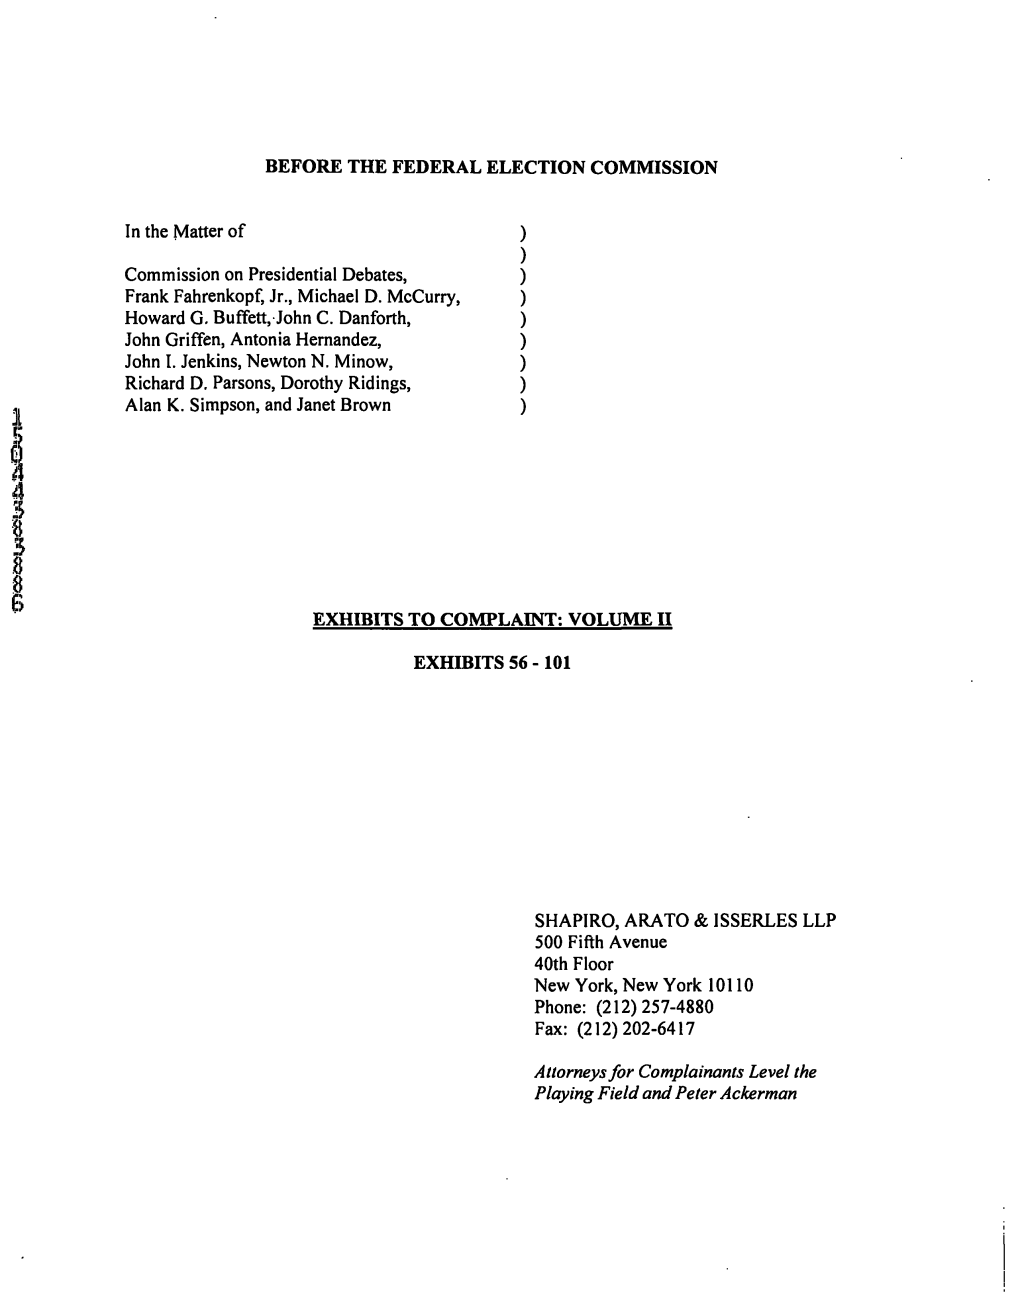 BEFORE the FEDERAL ELECTION COMMISSION in the Matter of Commission on Presidential Debates, Frank Fahrenkopf, Jr., Michael D. Mc